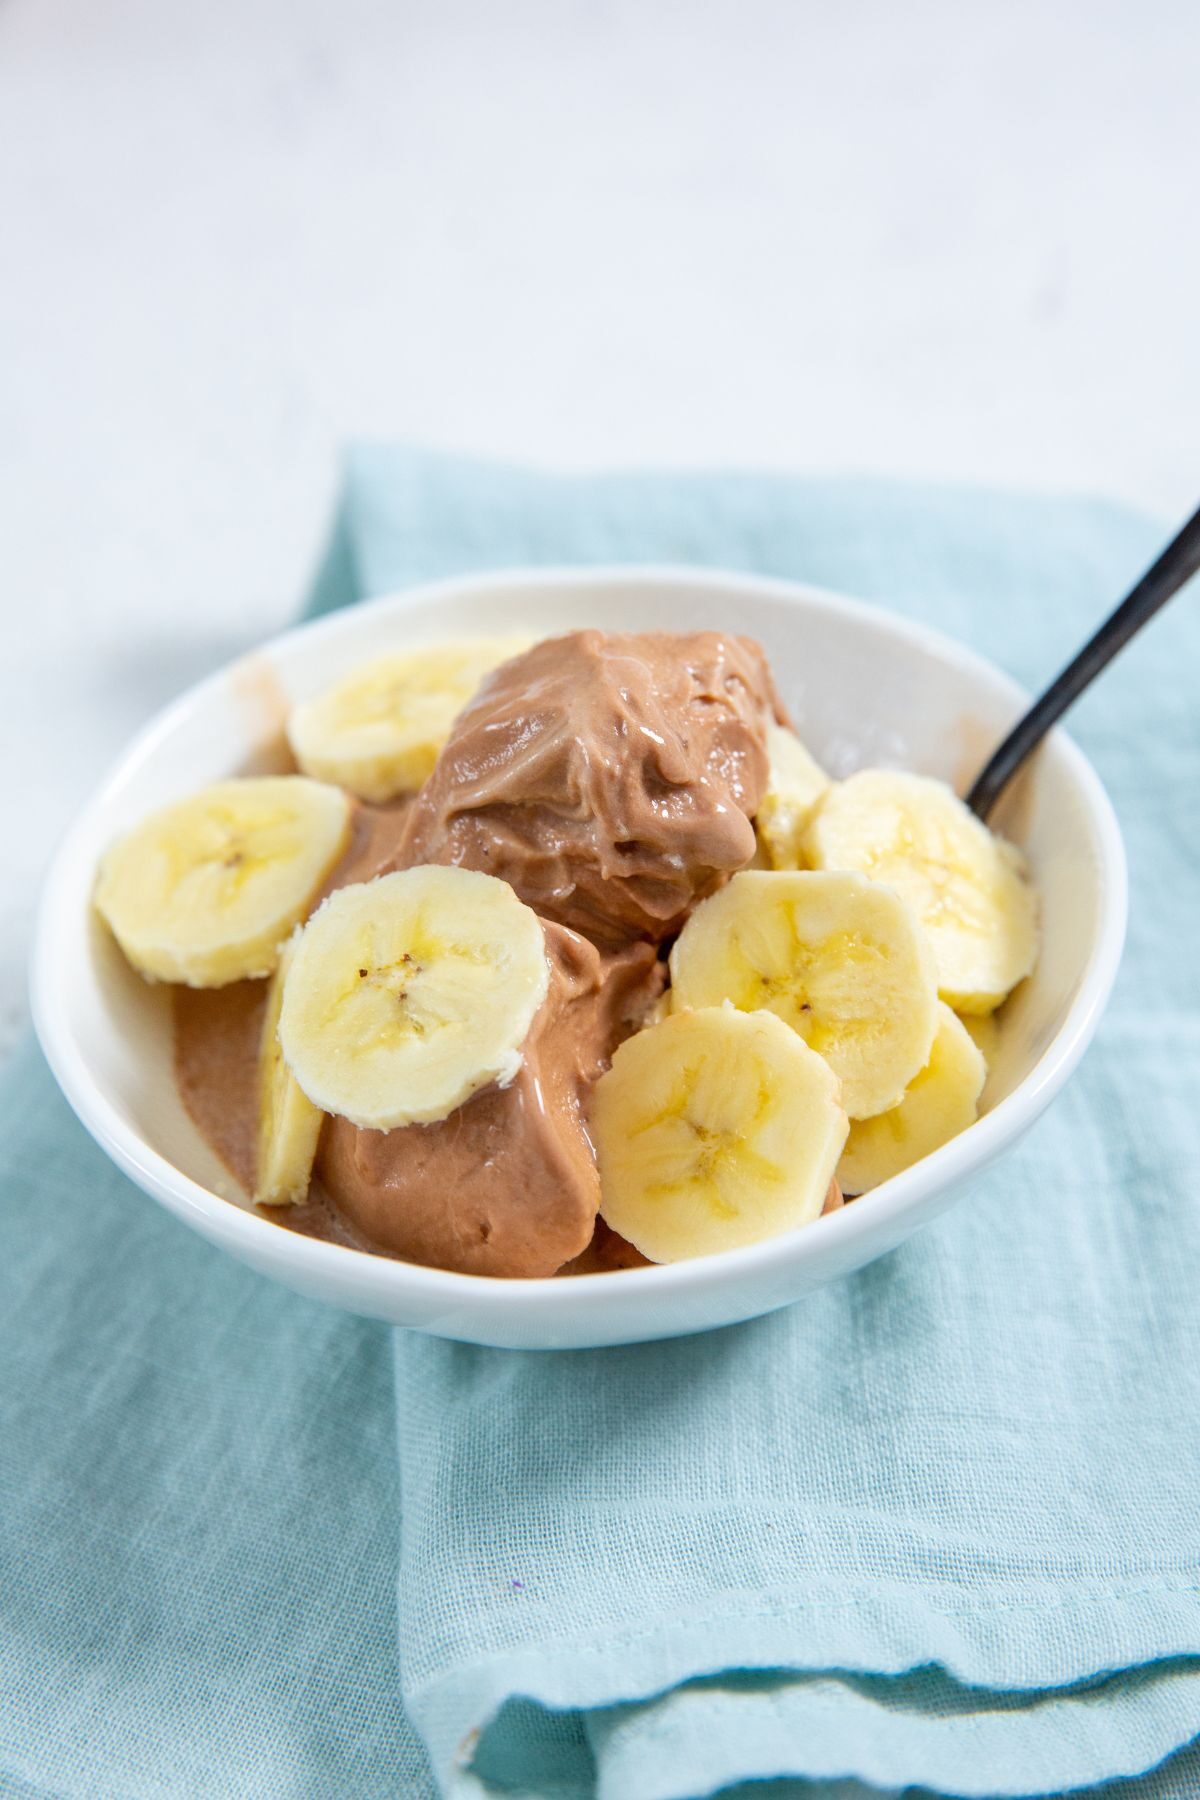 Chocolate Banana Protein Ice Cream in a white bowl with banana slices on top and a spoon in it with a blue napkin next to it